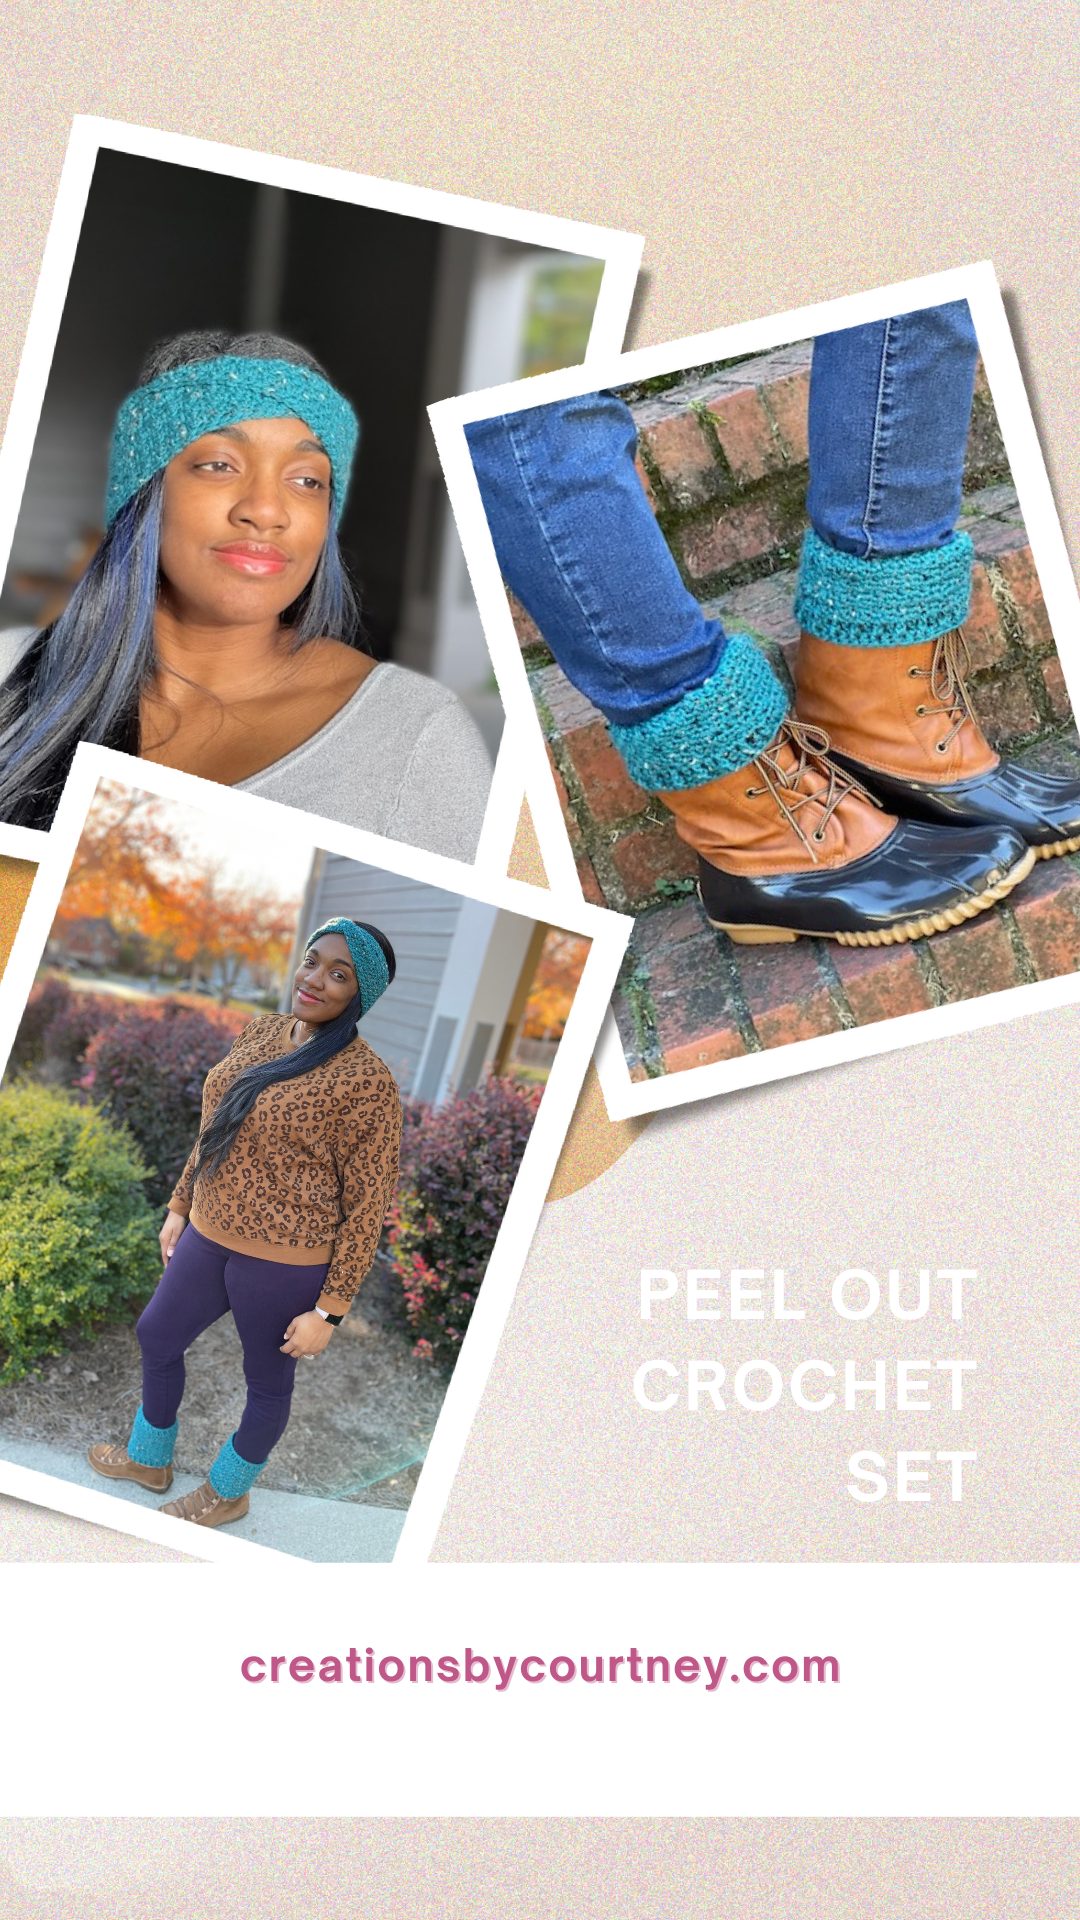 The Peel Out Crochet Set is a crochet pattern for boot cuffs and a twisted ear warmer made with worsted weight yarn. 